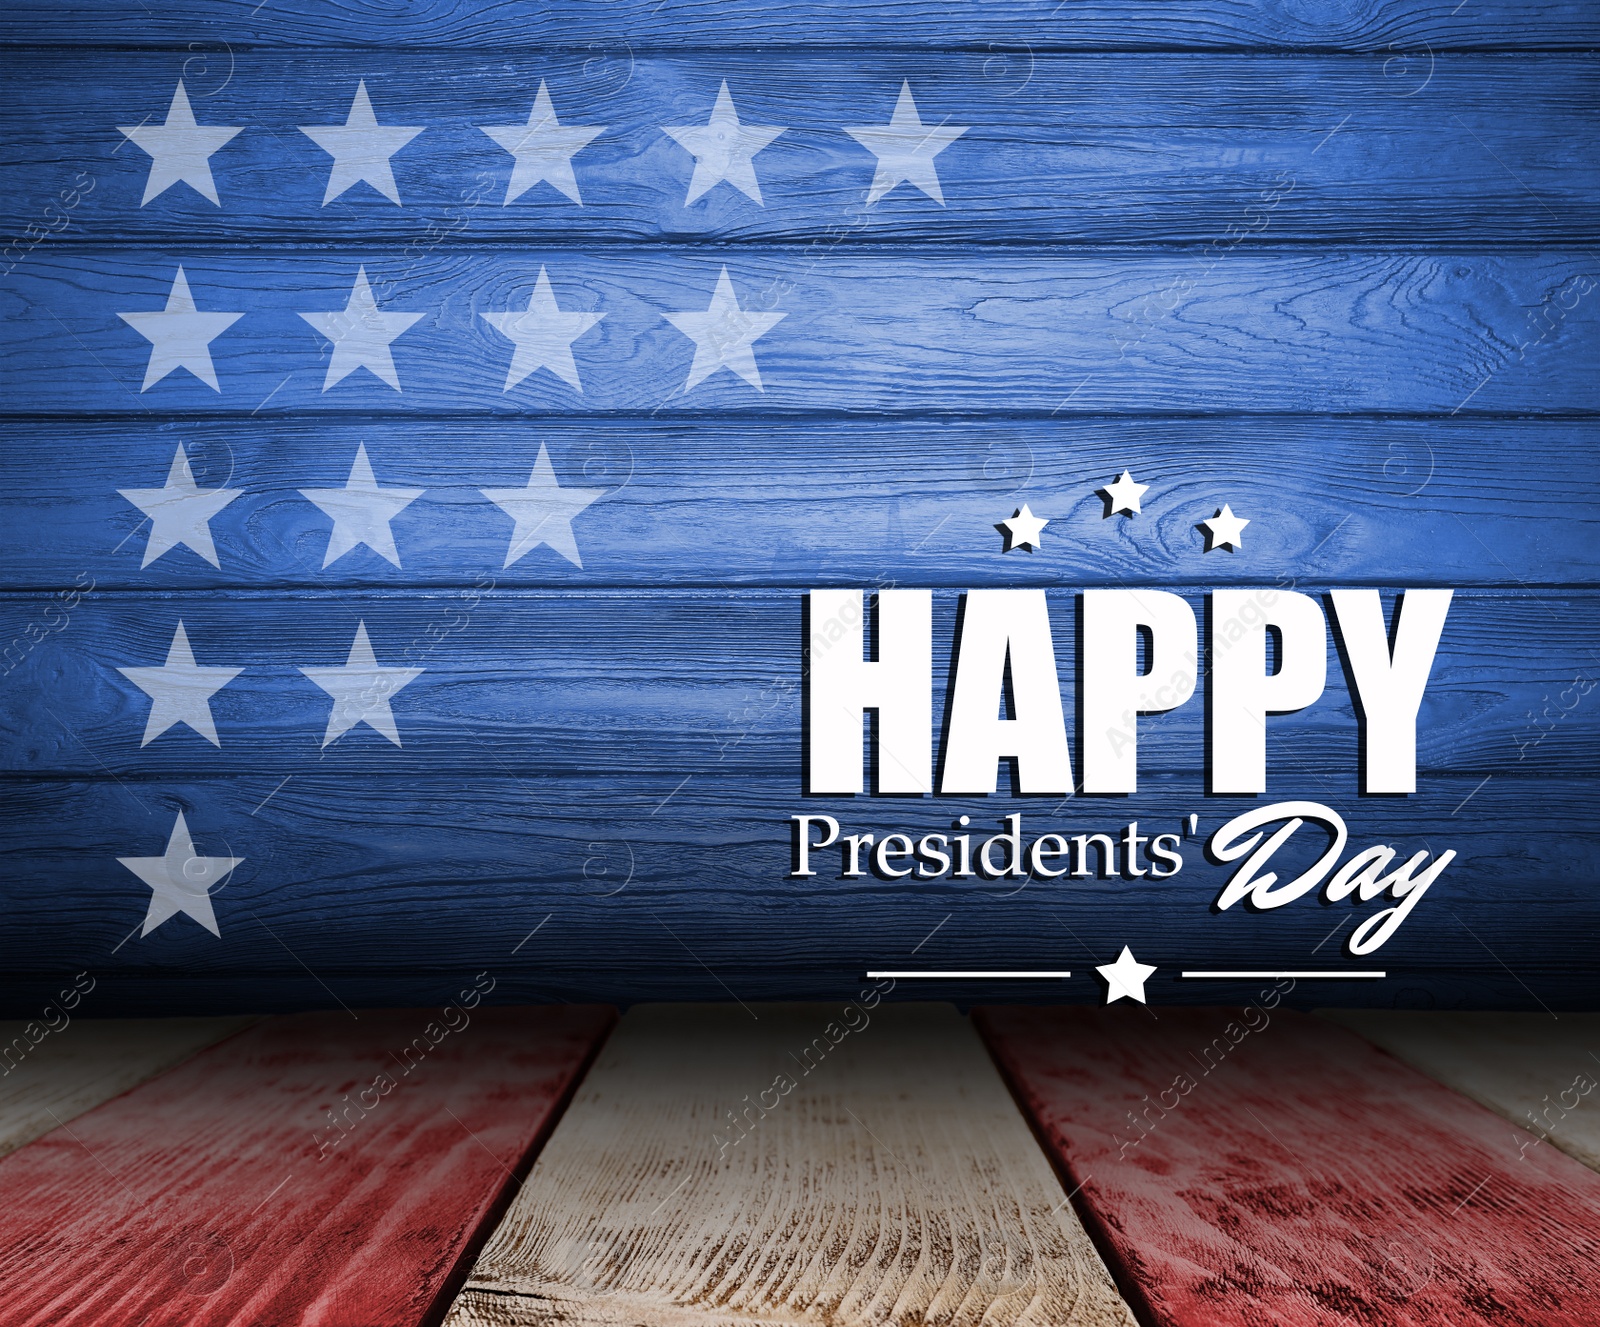 Image of Happy President's Day - federal holiday. Wooden surfaces decorated in style of American flag